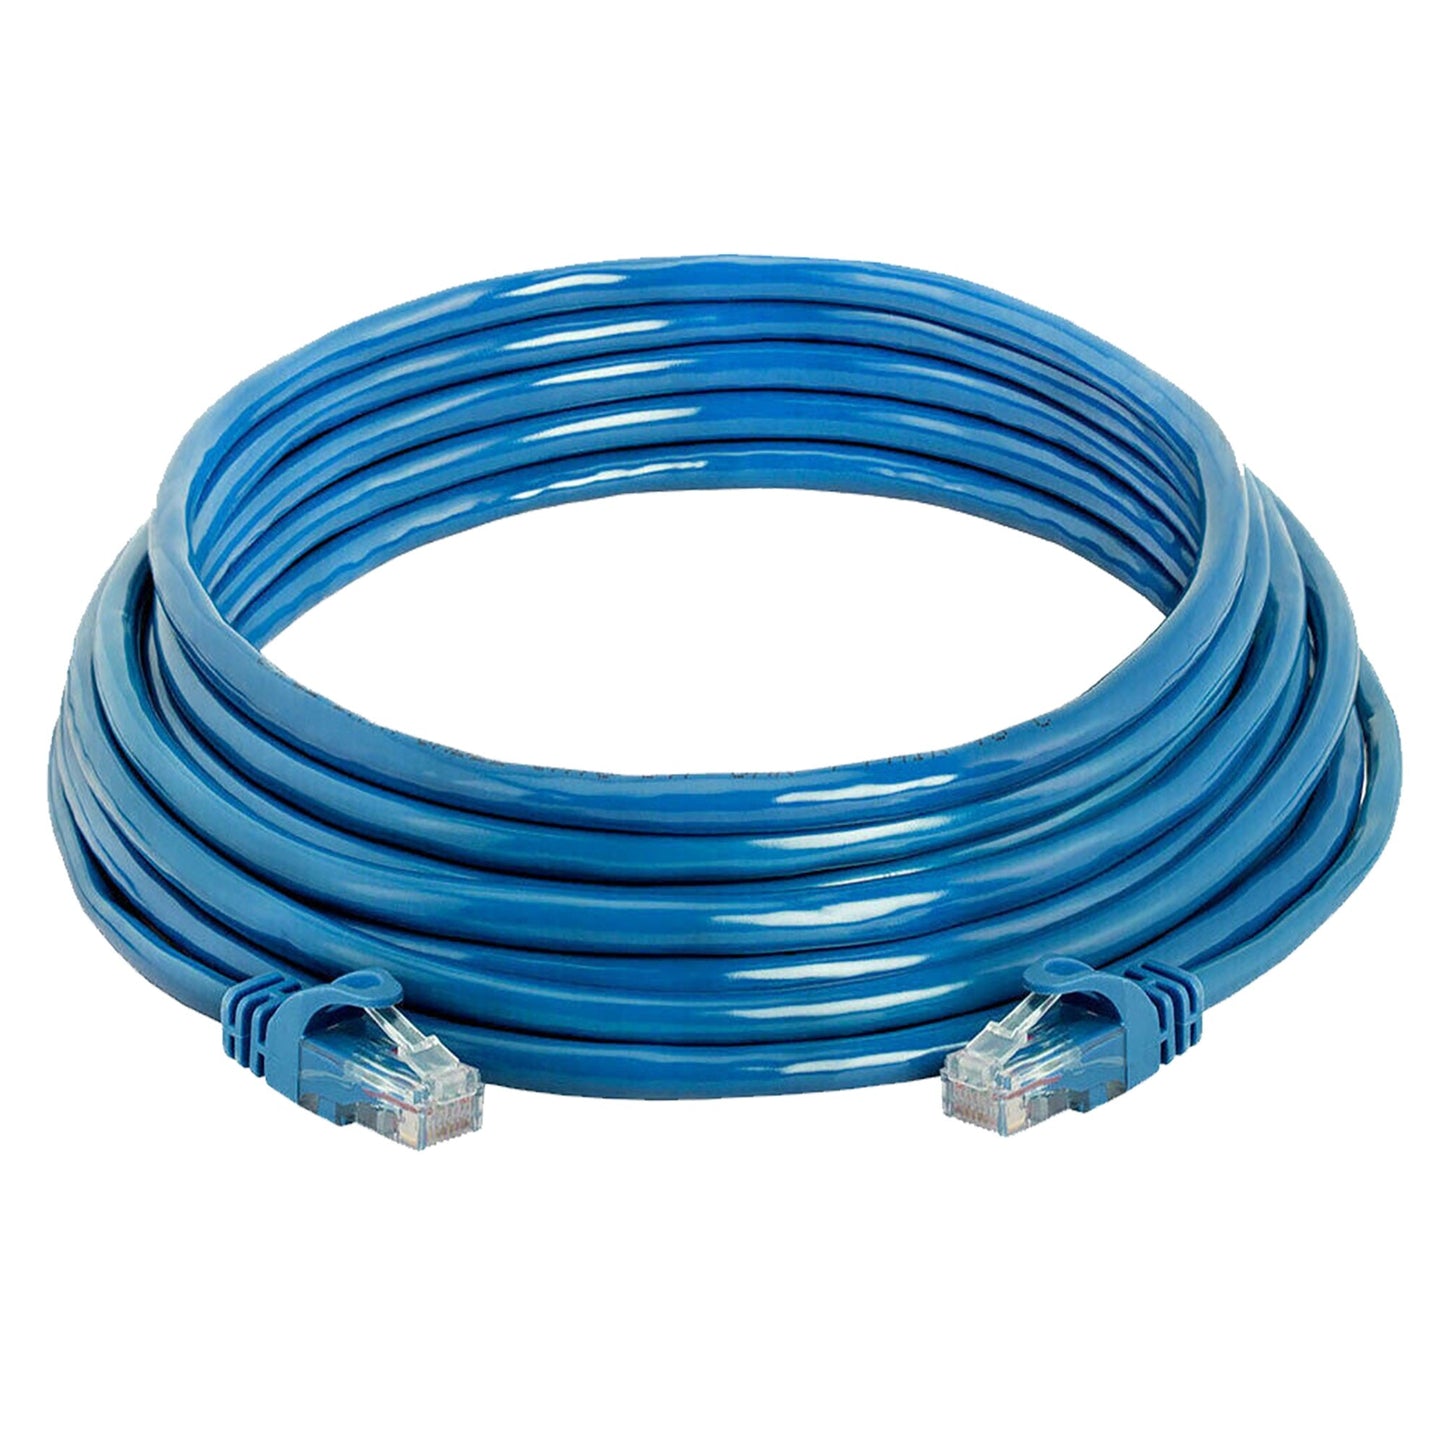 Cat6 Ethernet Cable, Internet Network LAN Patch Cords, Outdoor&Indoor,20 FT High Speed 26AWG LAN Network with Gold Plated RJ45 Connector, Weatherproof for Router/Gaming/Modem ET 20FT BLU